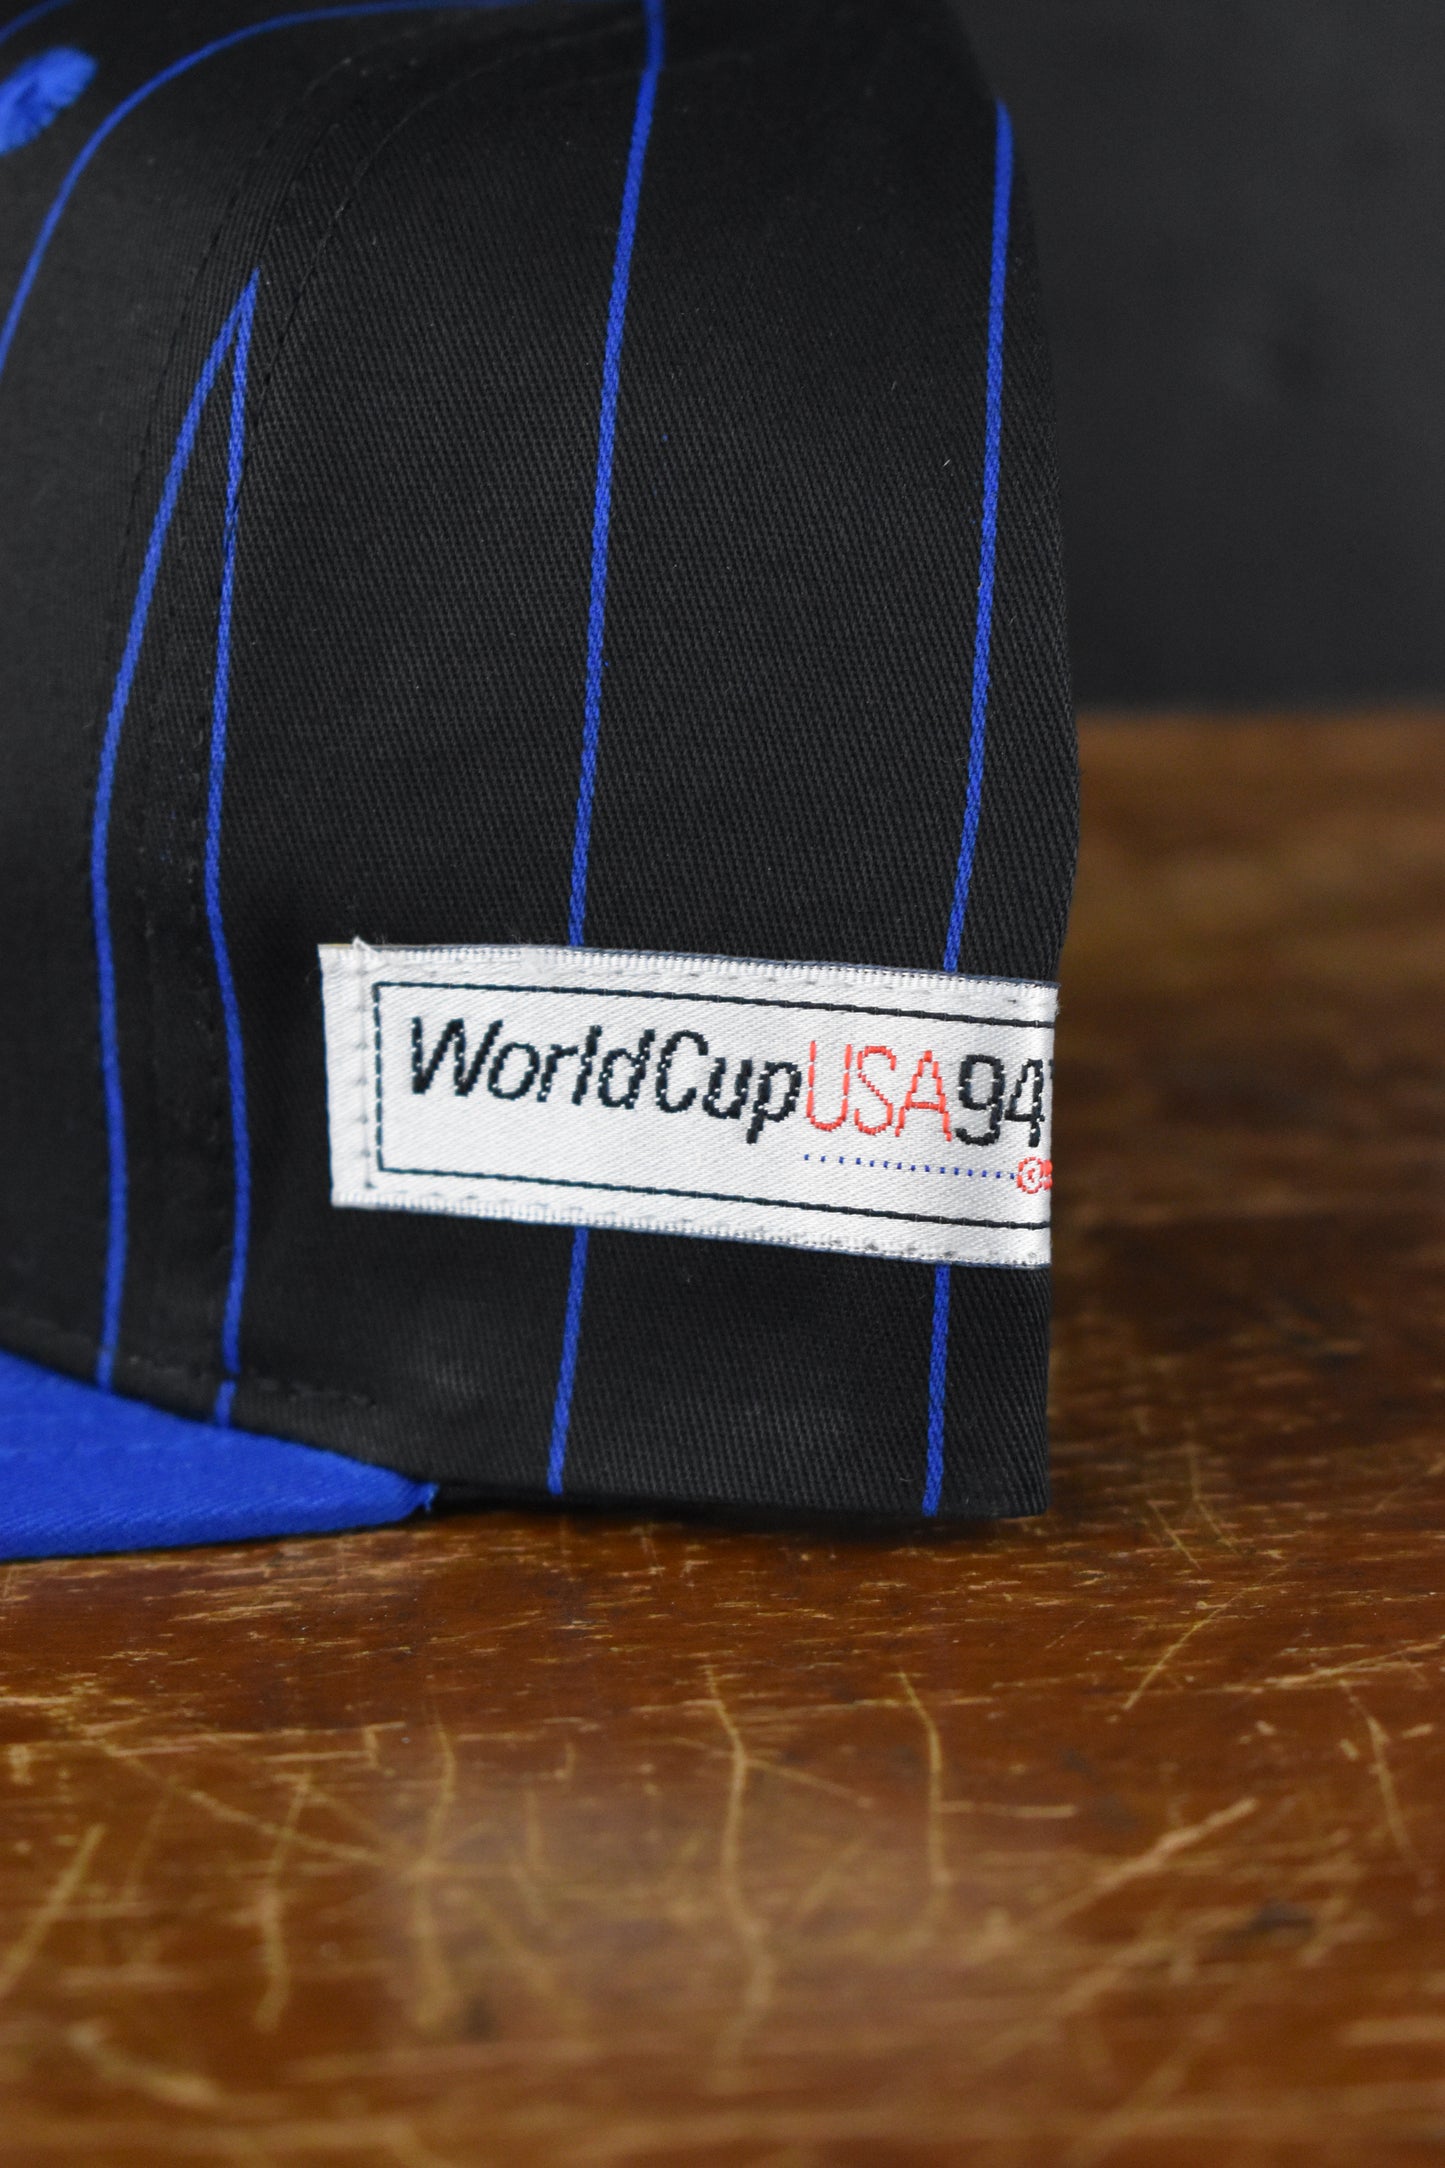 ‘94 World Cup Soccer Hat